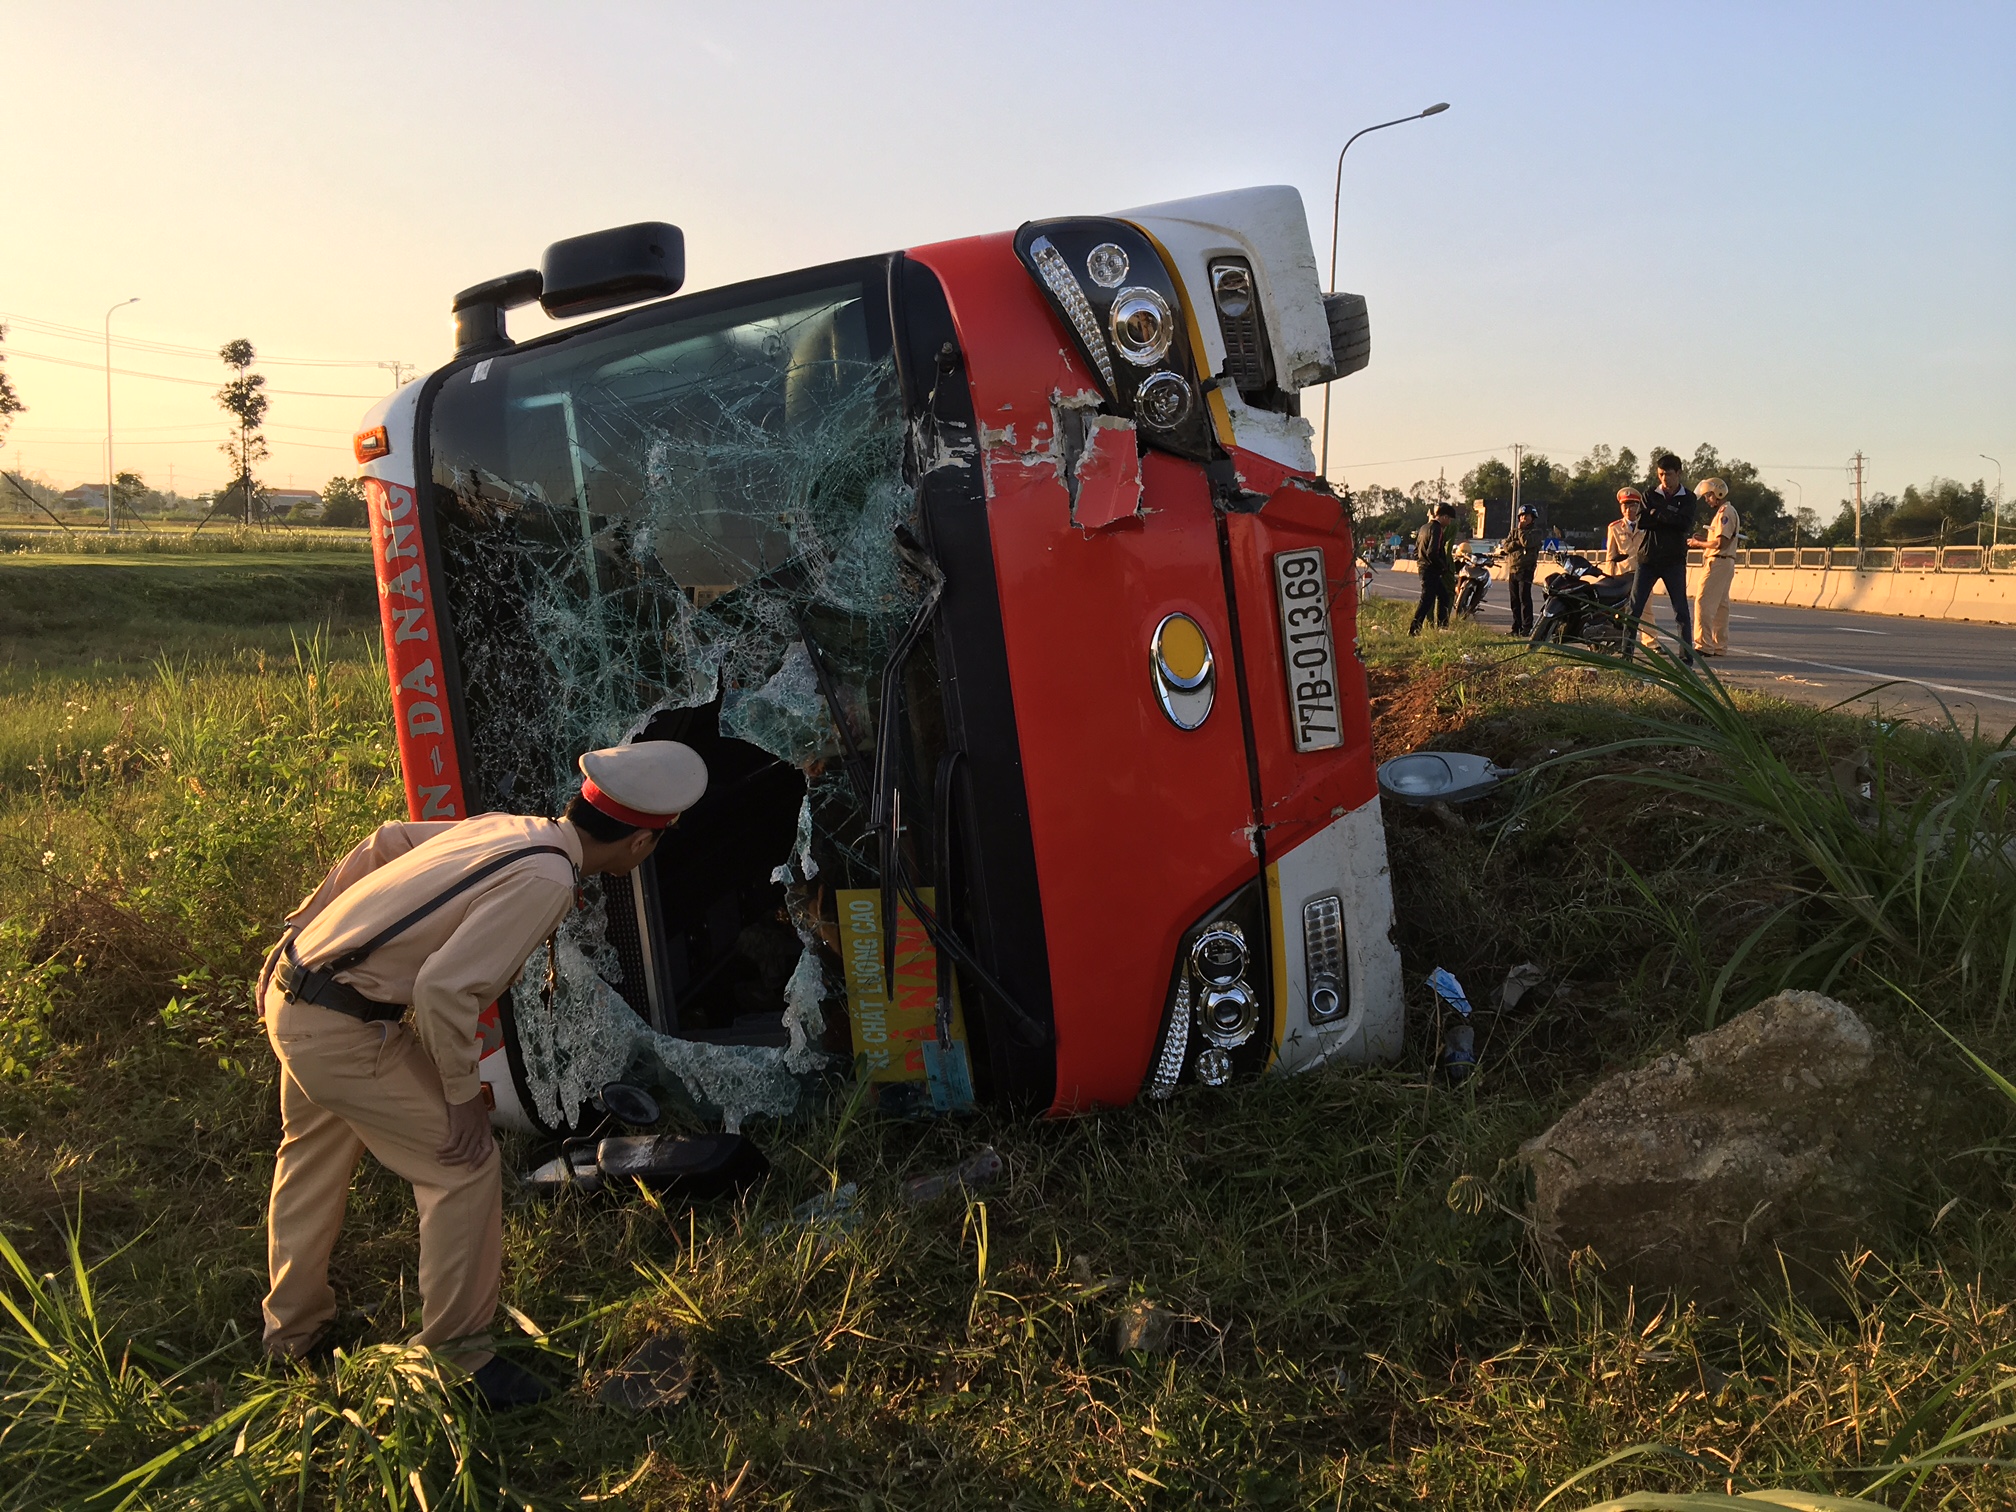 39 killed in traffic accidents on fourth day of Vietnam’s Tet fest